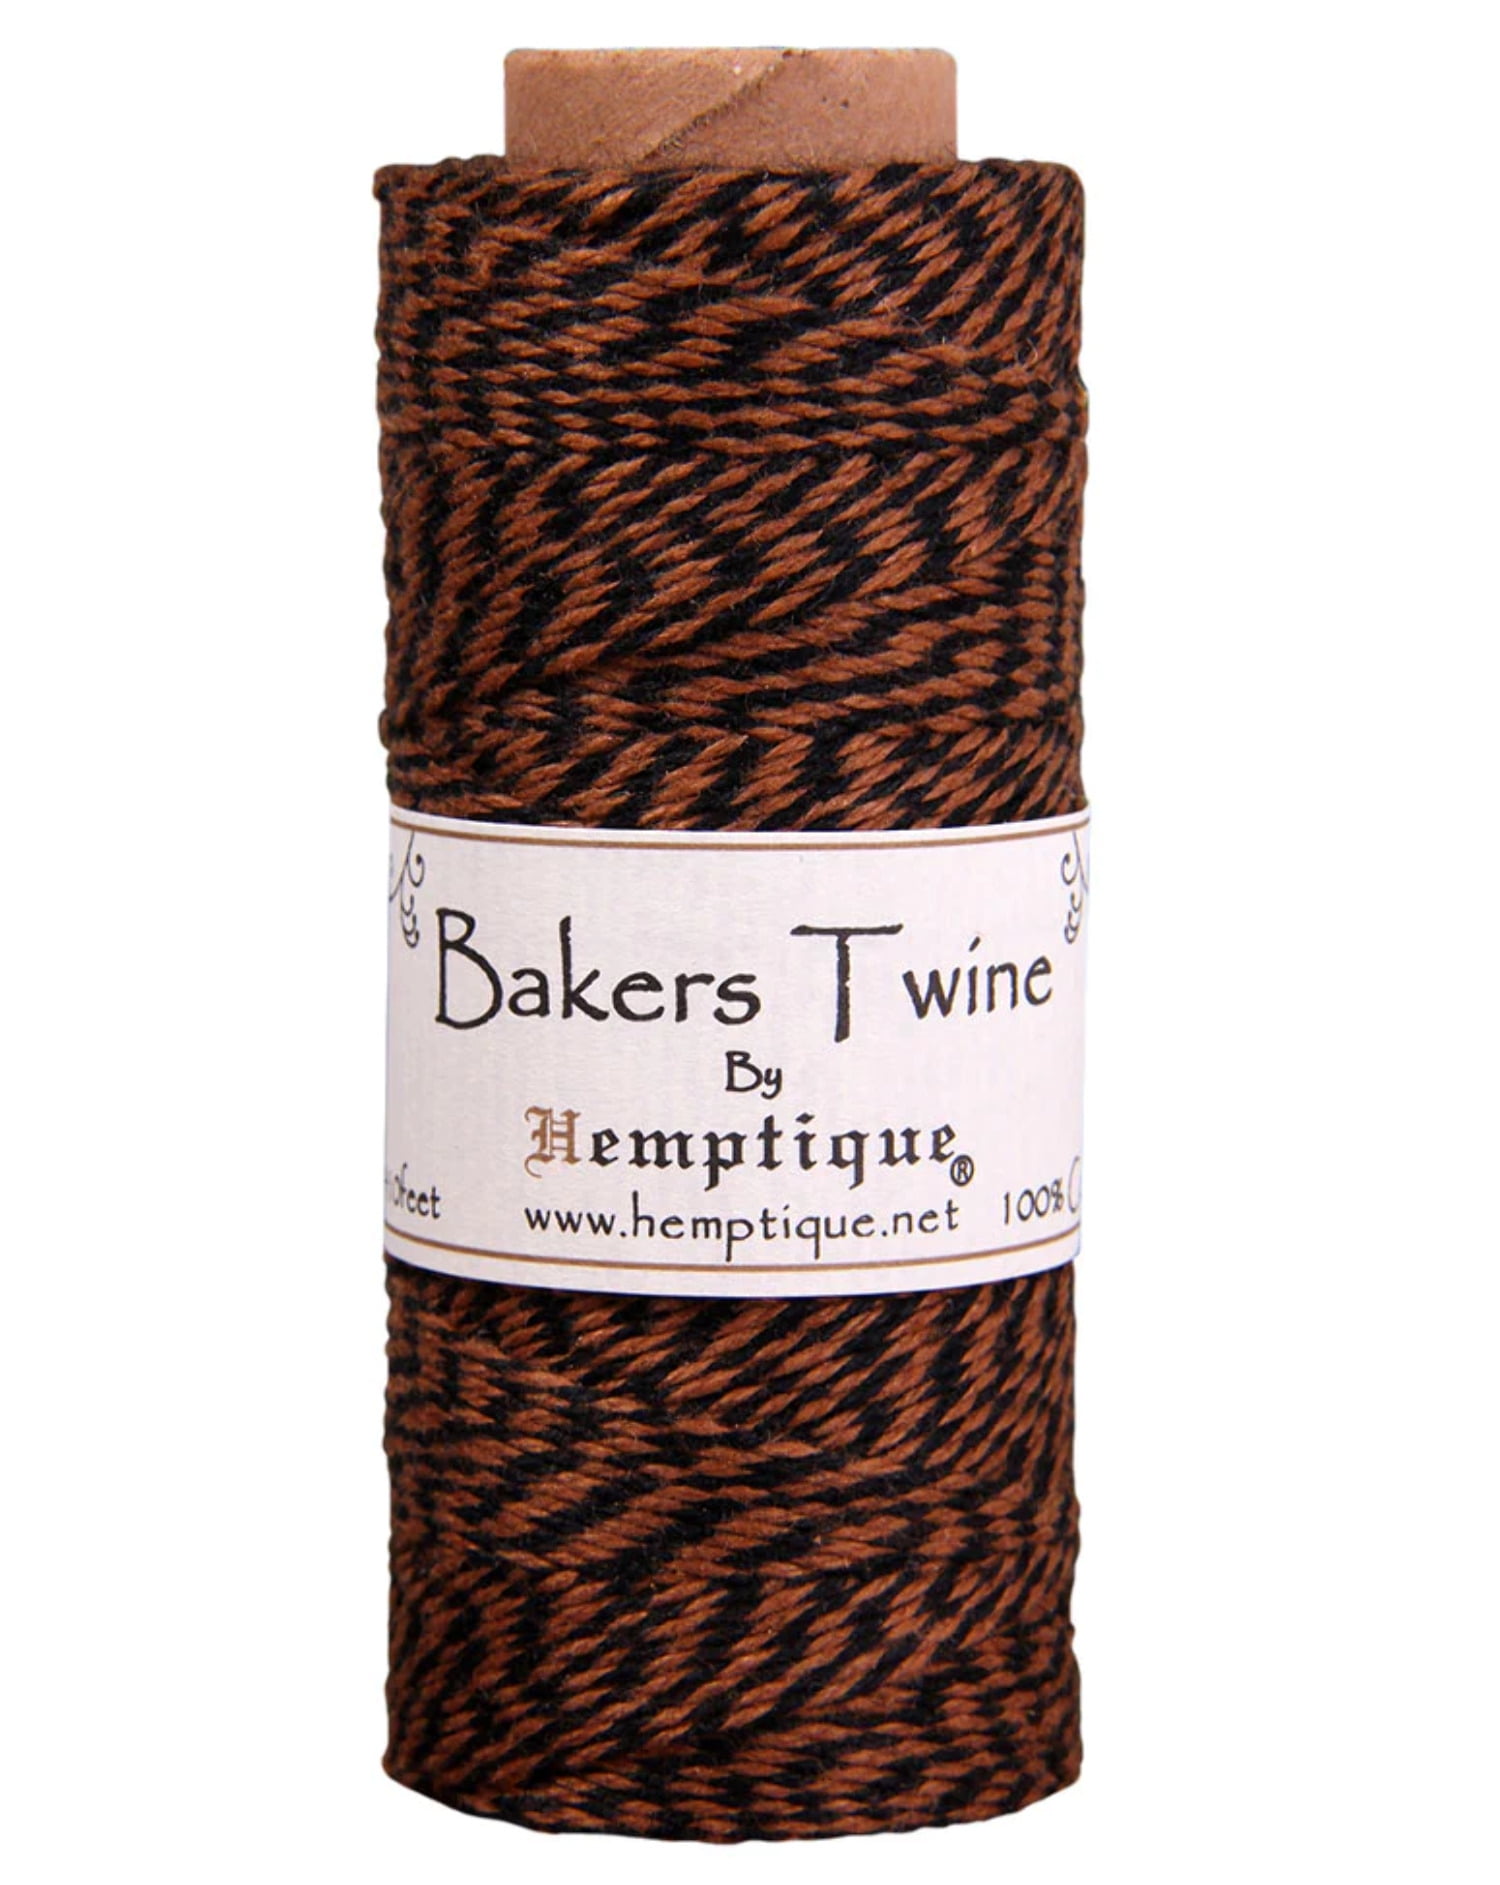 Black Twine Black and White Striped Bakers Twine Licorice Divine